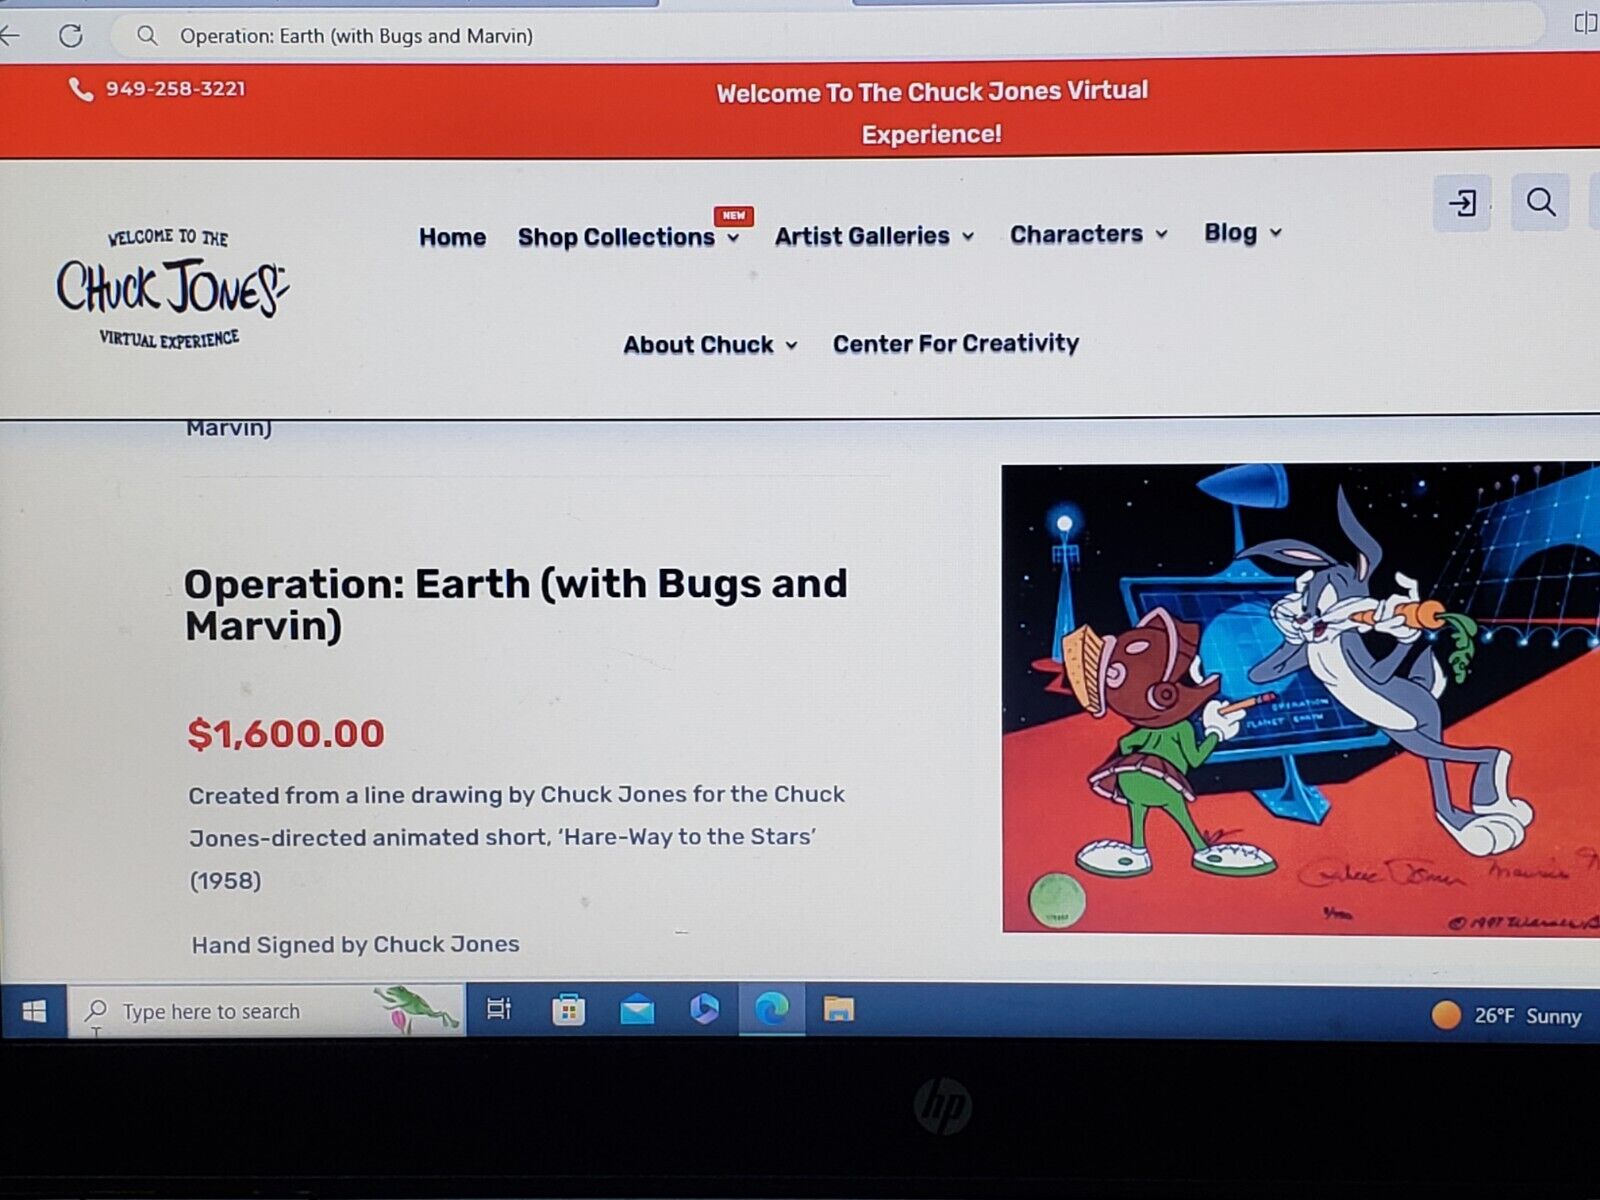 WARNER BROTHERS CEL 460/750 OPERATION: EARTH SIGNED BY CHUCK JONES- M NOBL